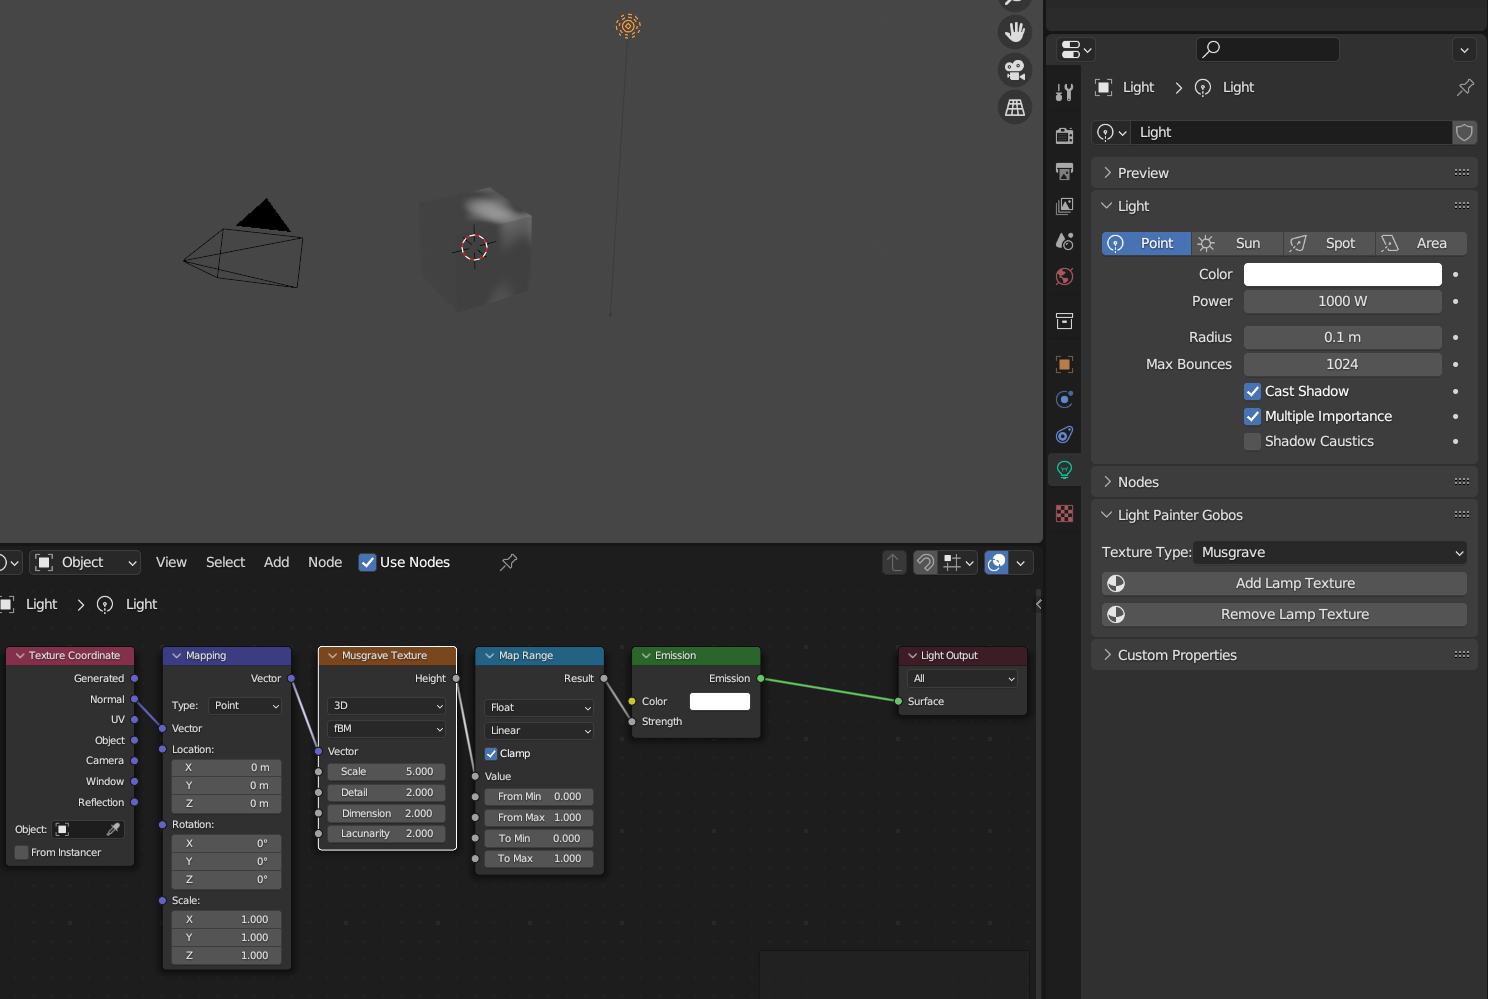 Adding procedural noise to a point lamp to create gobos or shadows